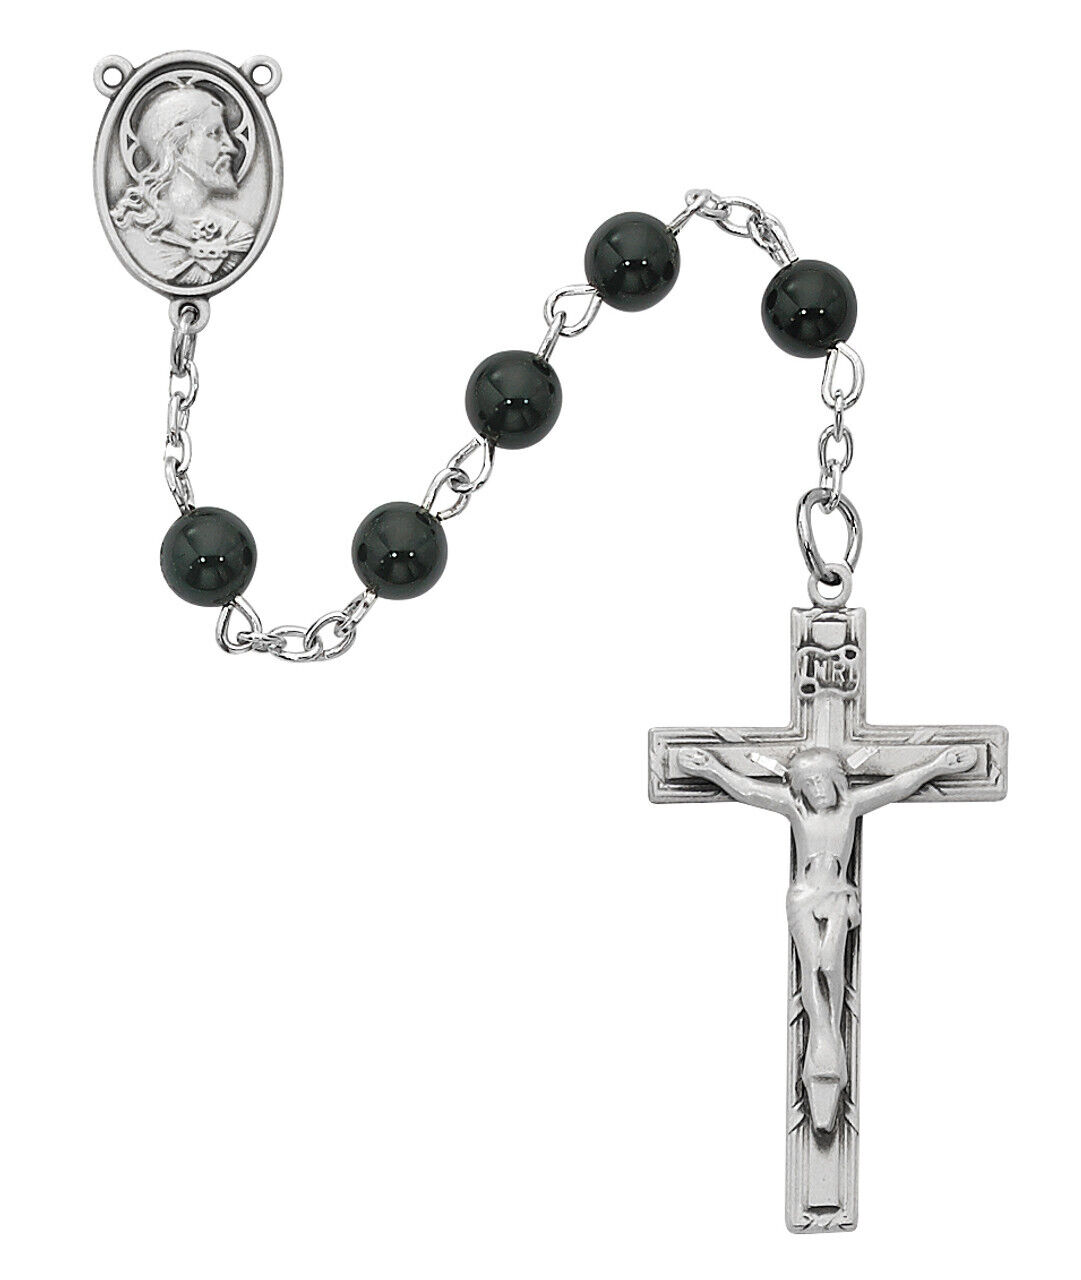 Genuine Black Onyx 6mm Bead Sterling Center And Crucifix Holy Gemstone Rosaries